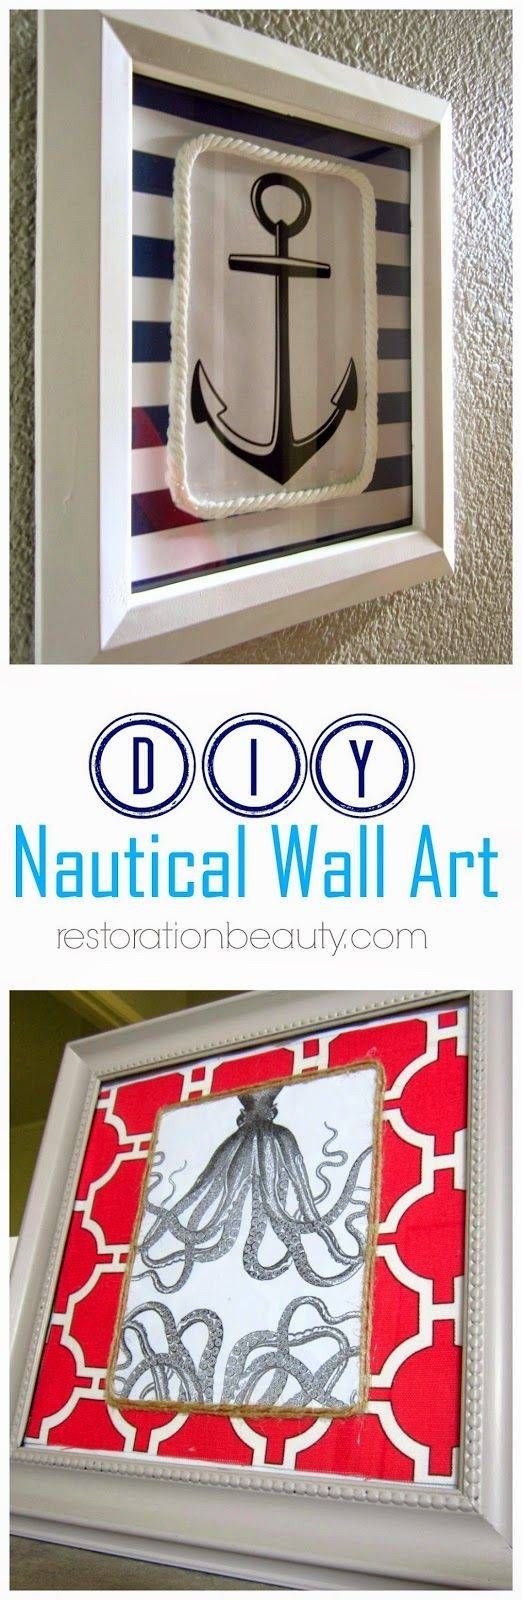 Best 25+ Nautical Wall Art Ideas On Pinterest | Whale Themed Throughout Latest Nautical Canvas Wall Art (View 16 of 20)